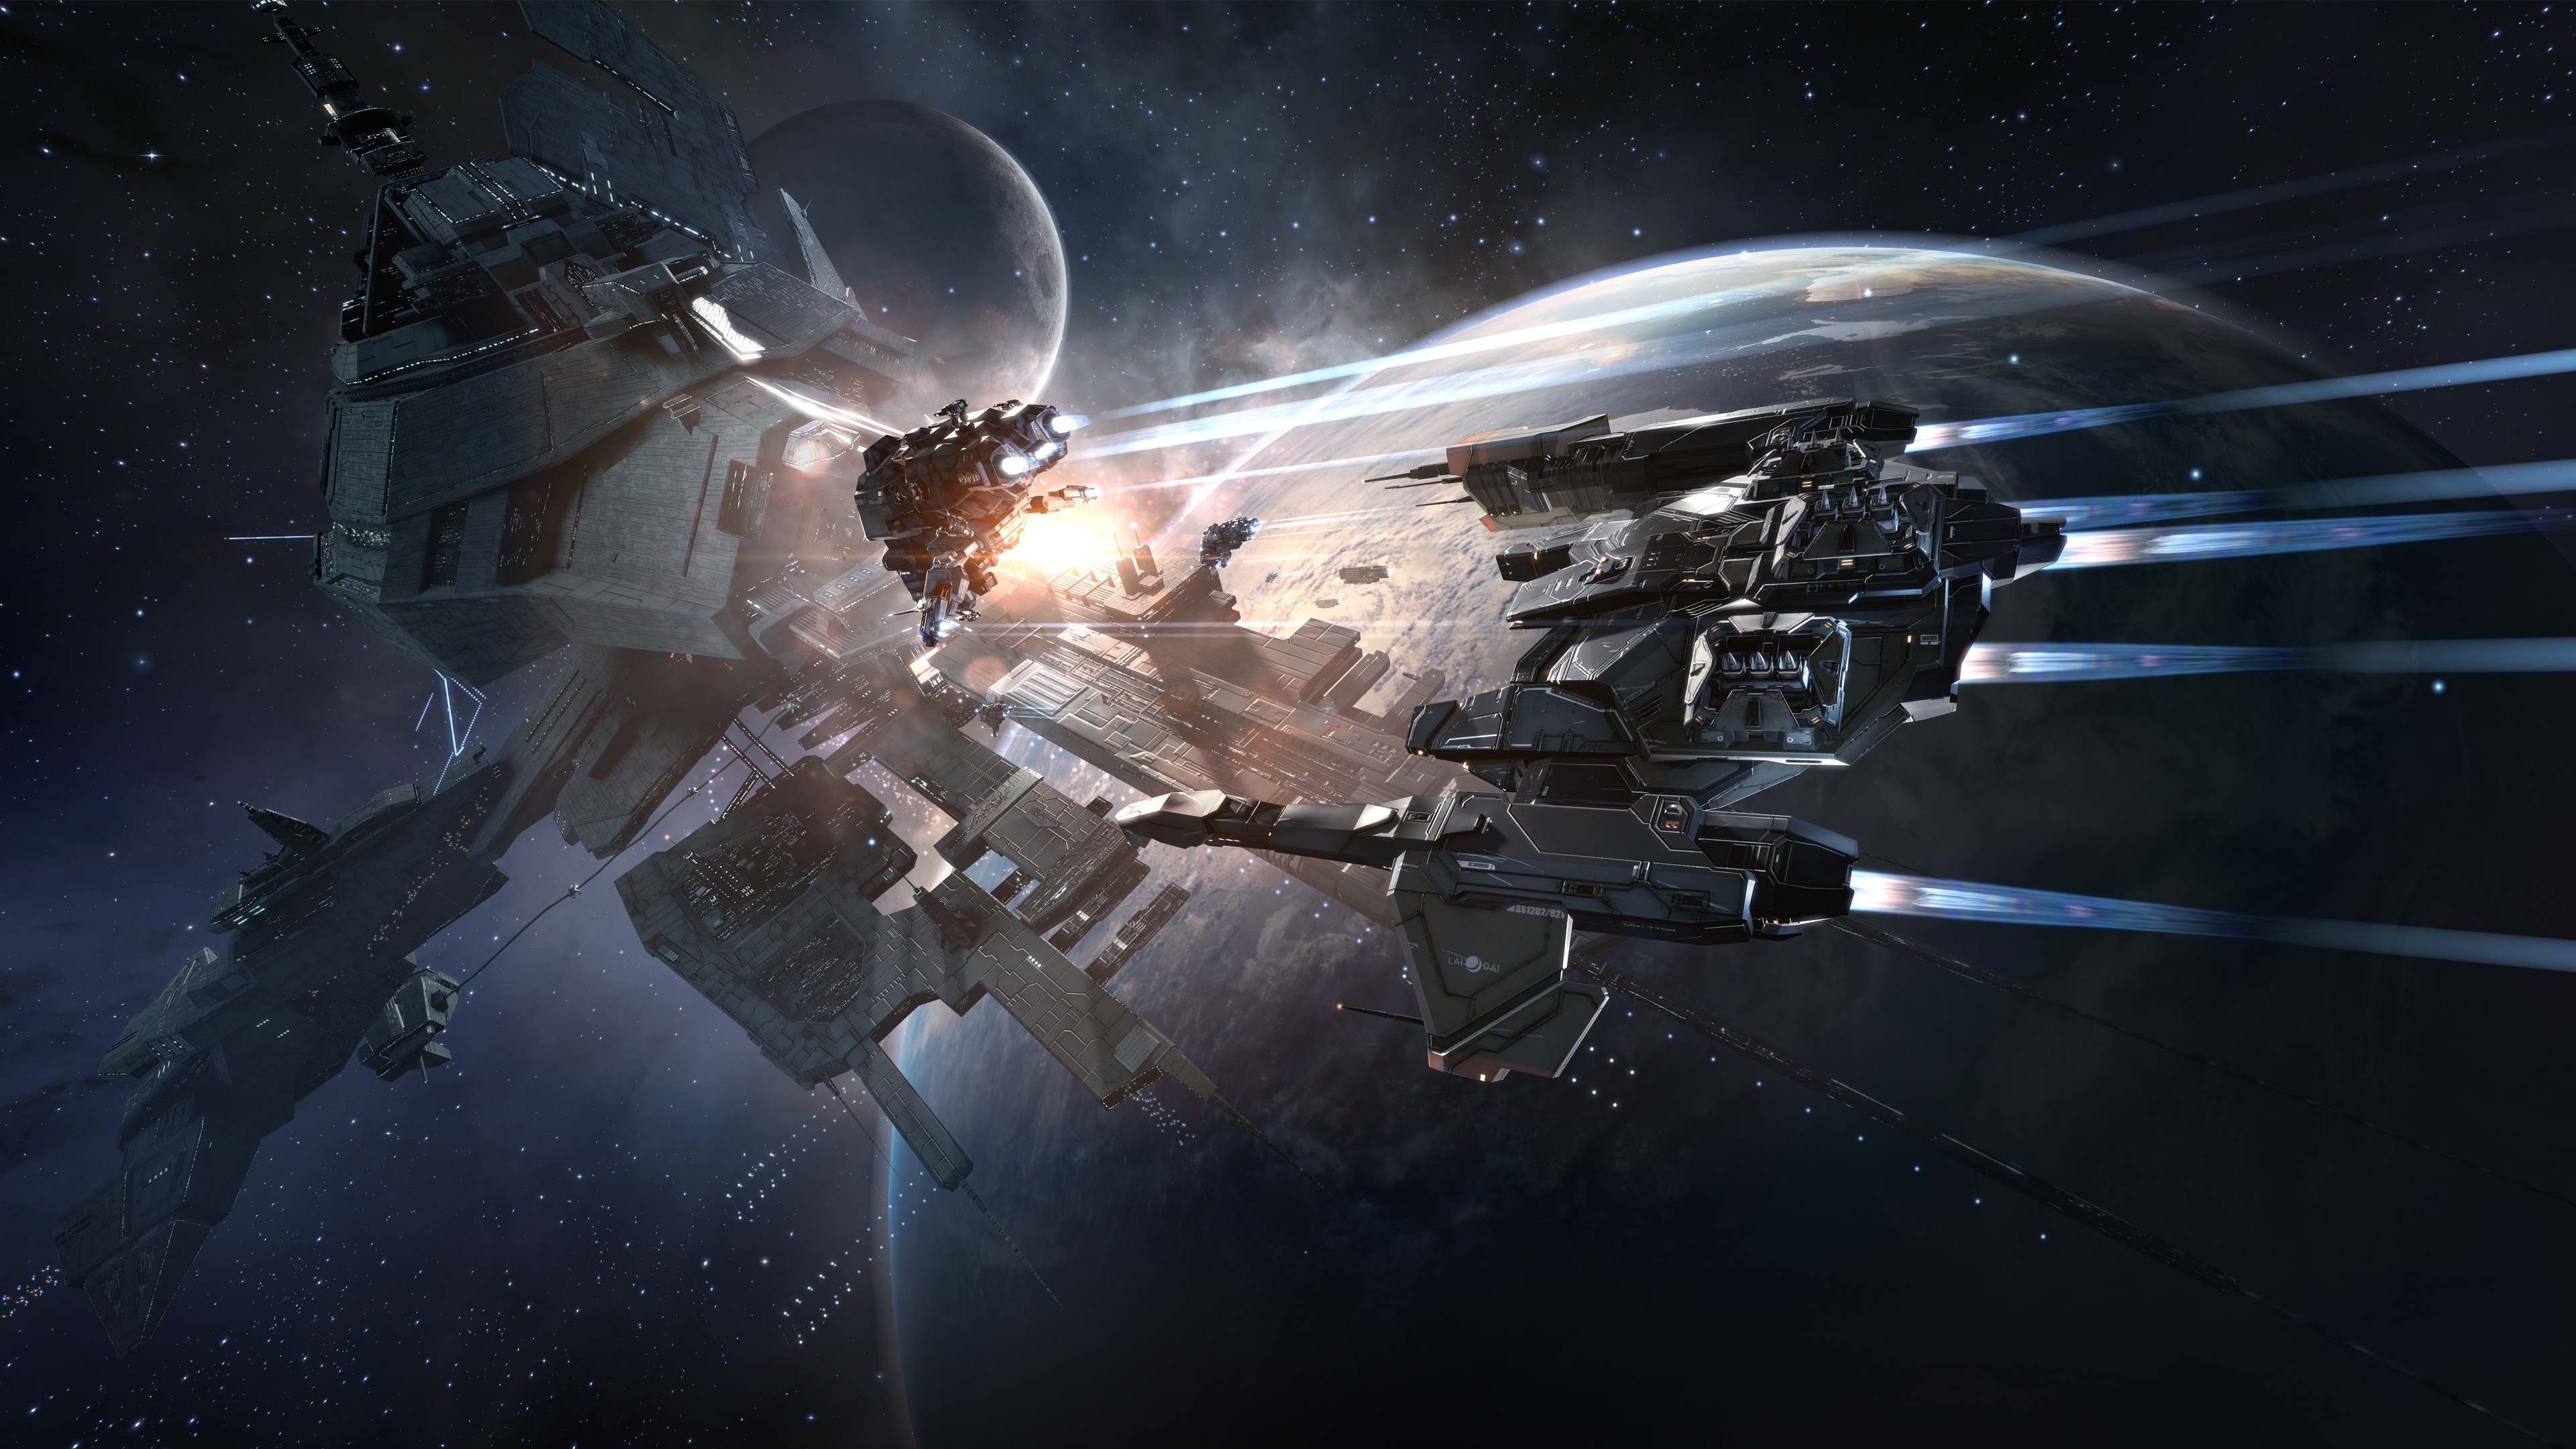 EVE Online Spaceship Galaxy Science Fiction Video Games Planet Video Game Art 3840x2160